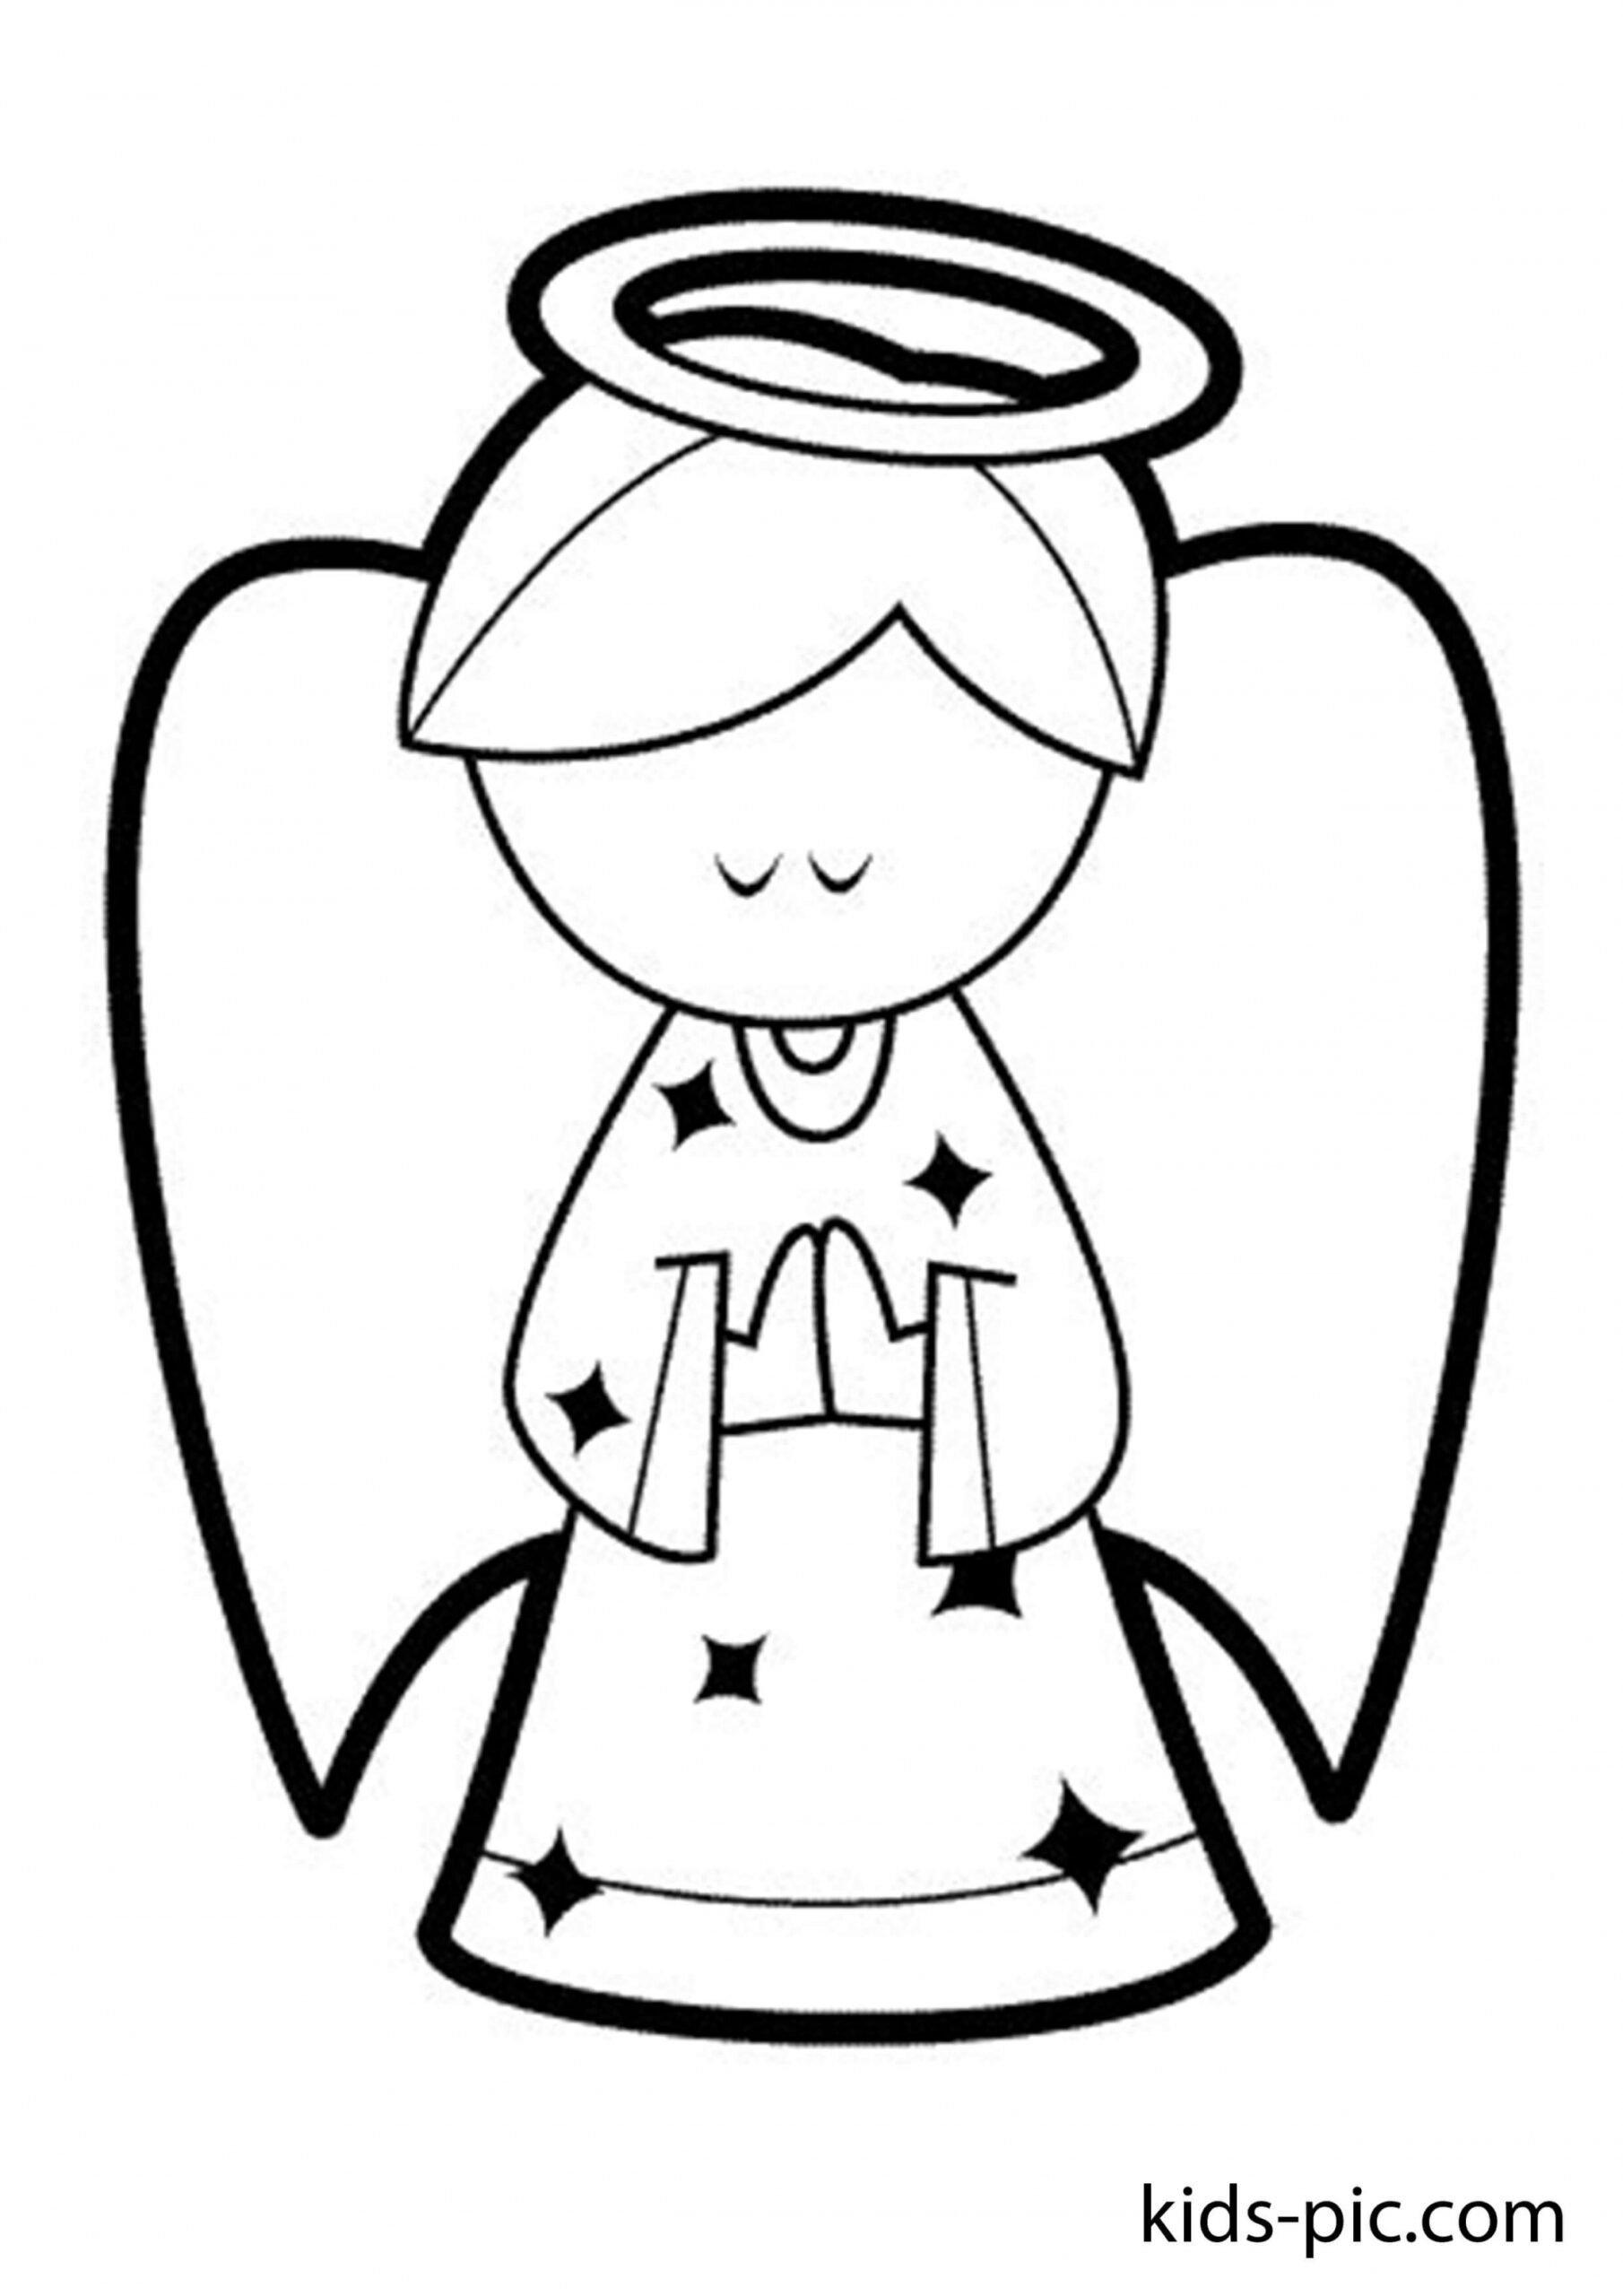 Angel Template Cut Out  Kids-Pic - Cut Out Angel Template Printable Free